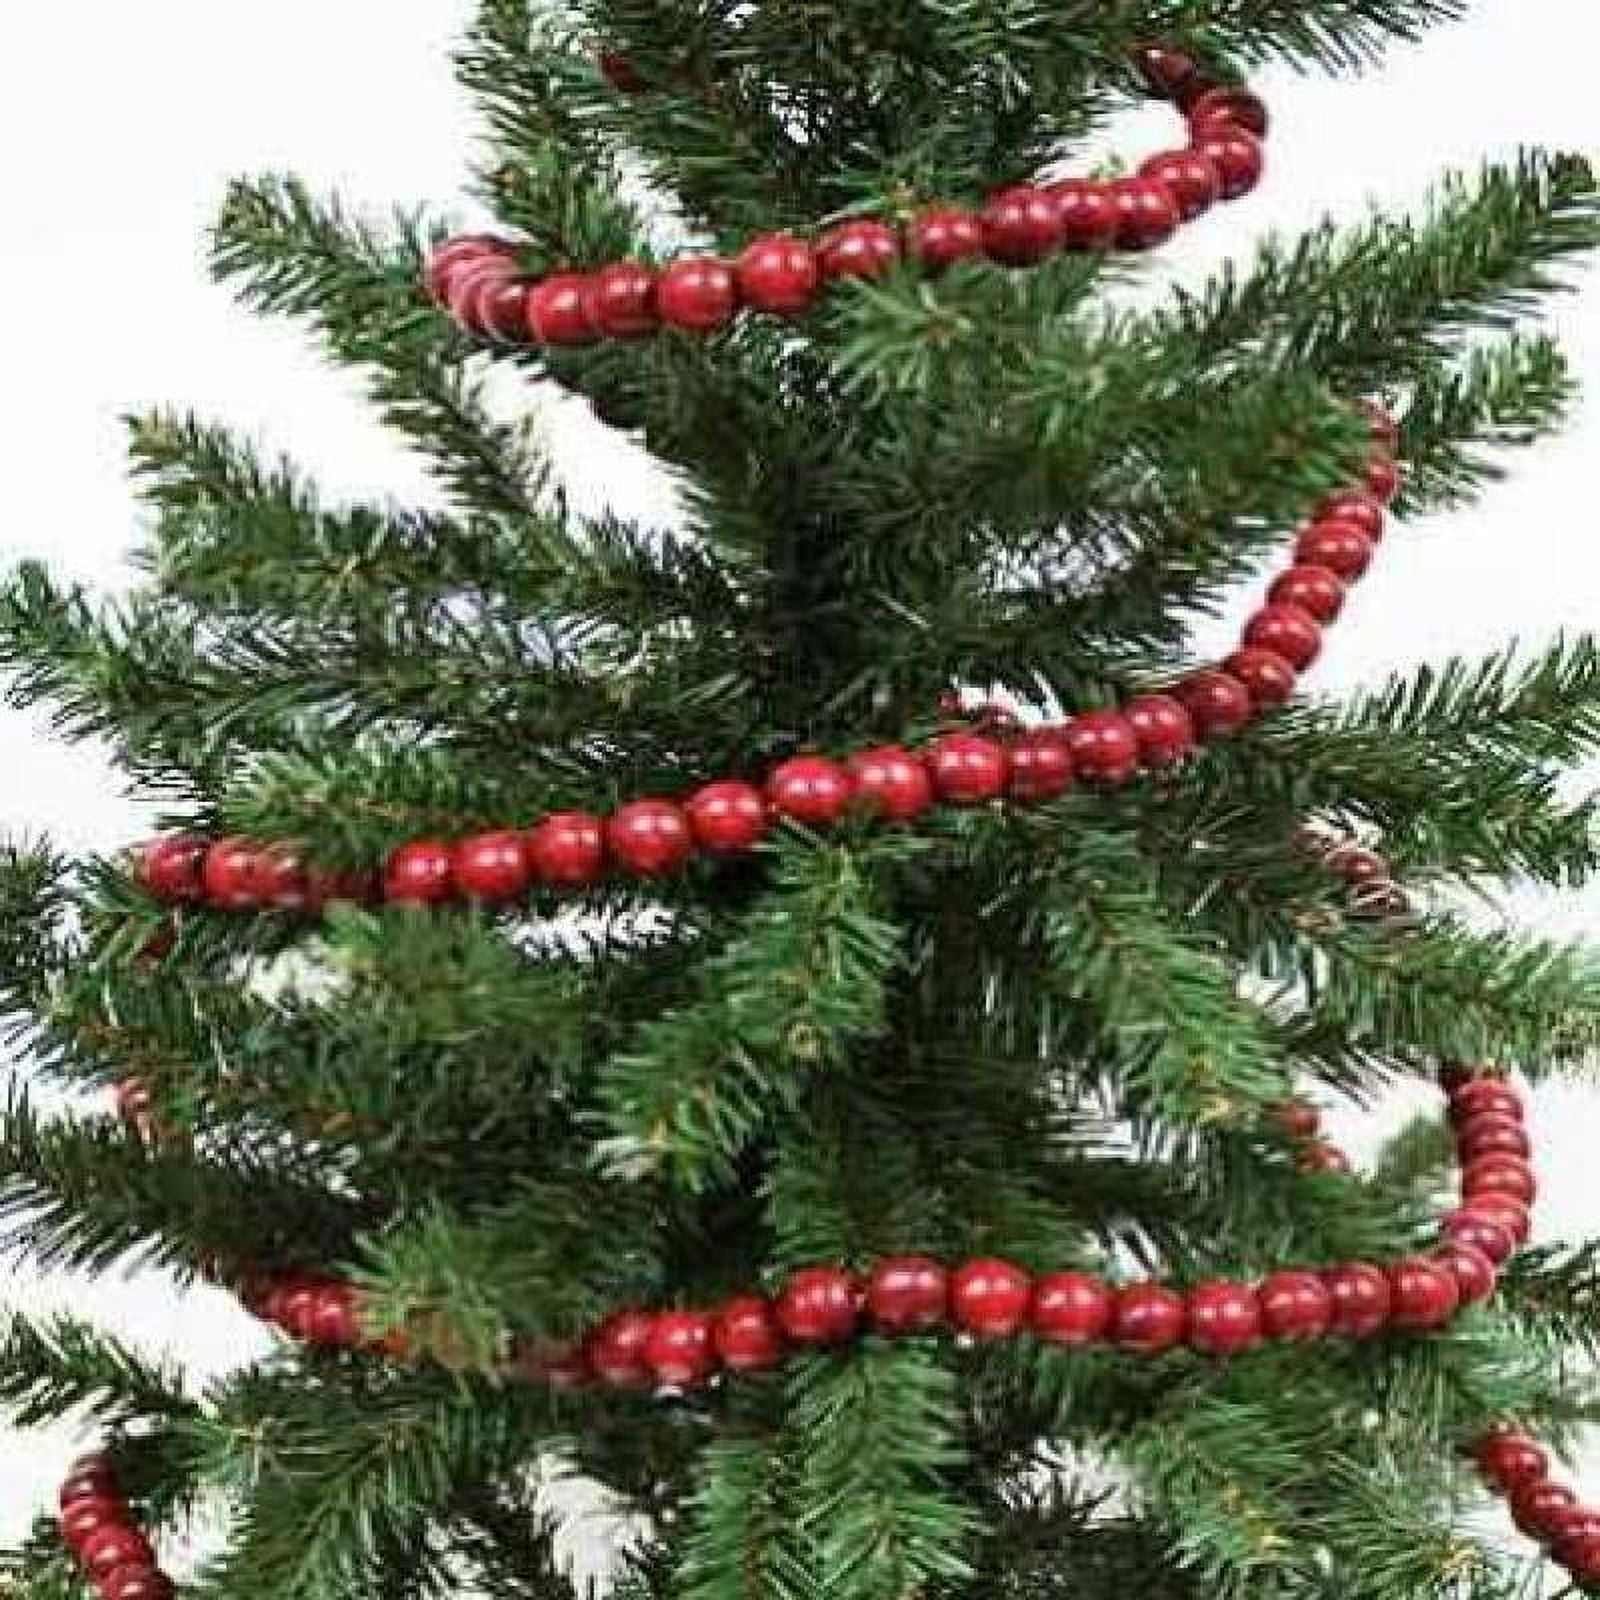 Factory Direct Craft Burgundy Cranberry Color Wooden Bead 9 Foot Christmas  Garland - The Look of Strung Cranberries